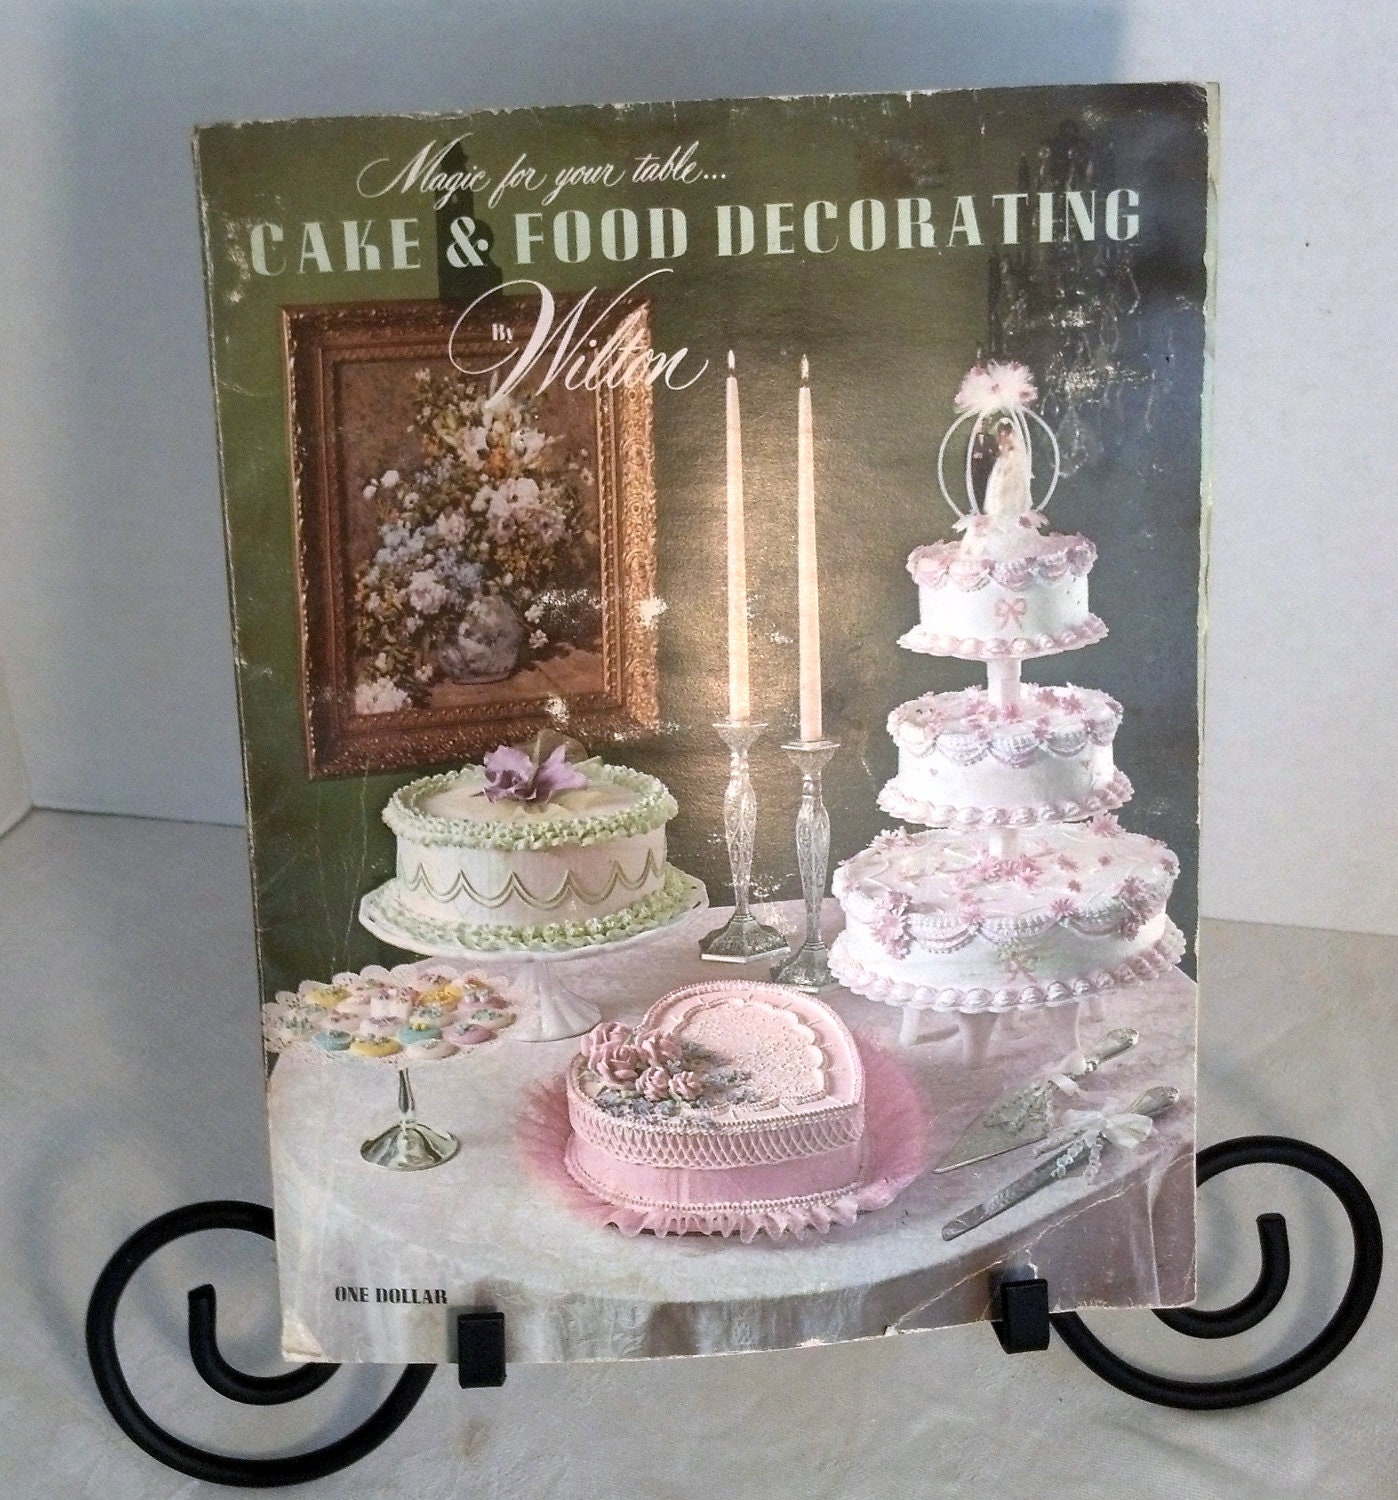 Cake Decorating Book Magic For Your Table Cake And Food